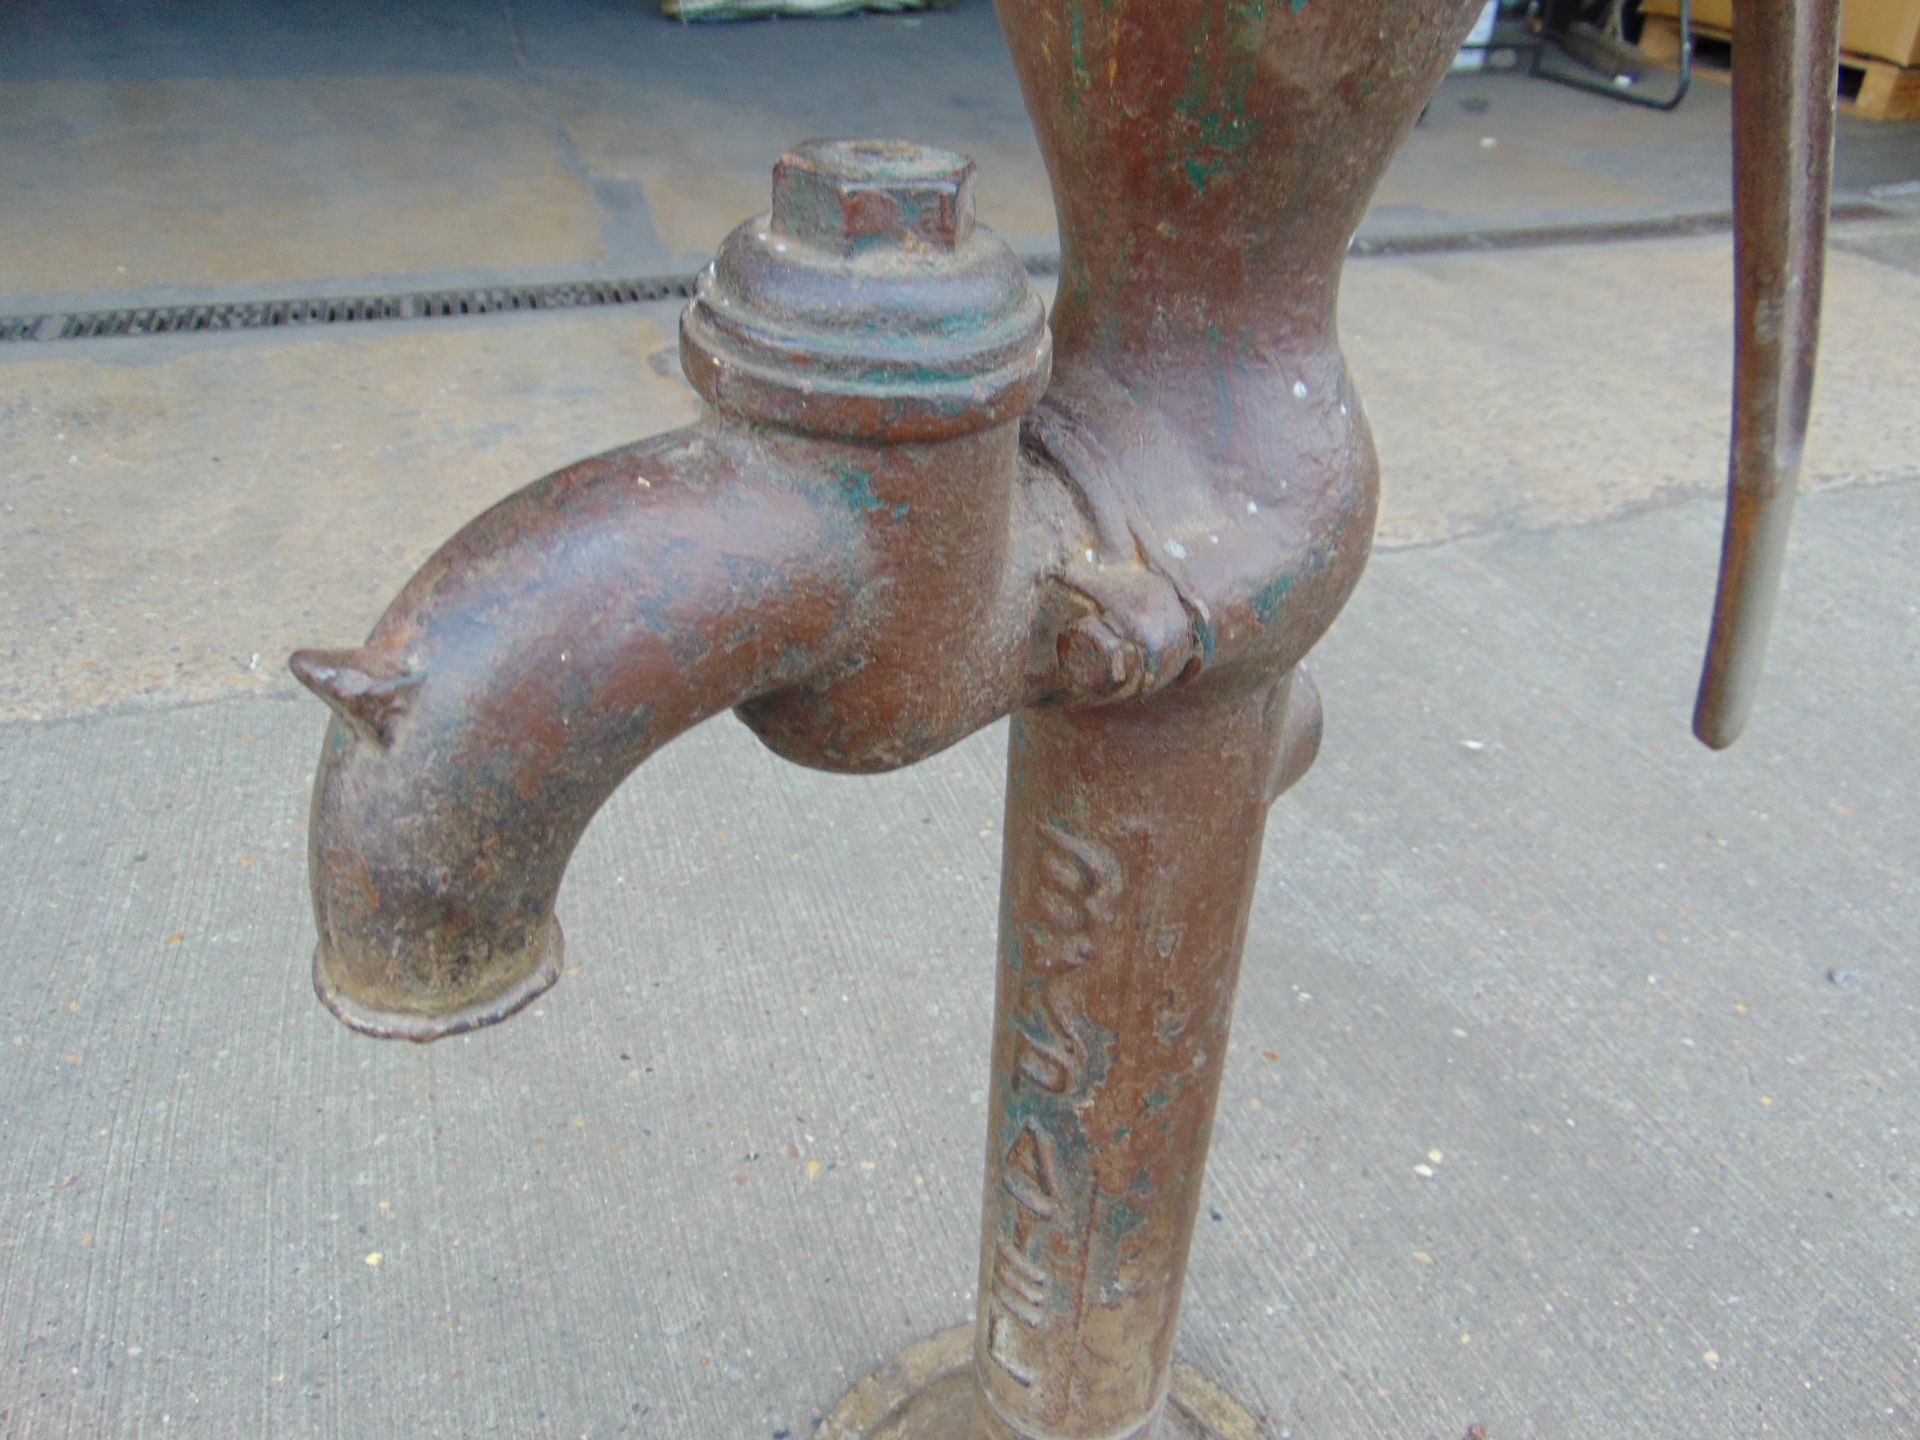 Genuine Anitique Full Size Cast Iron Water Pump - Image 5 of 6